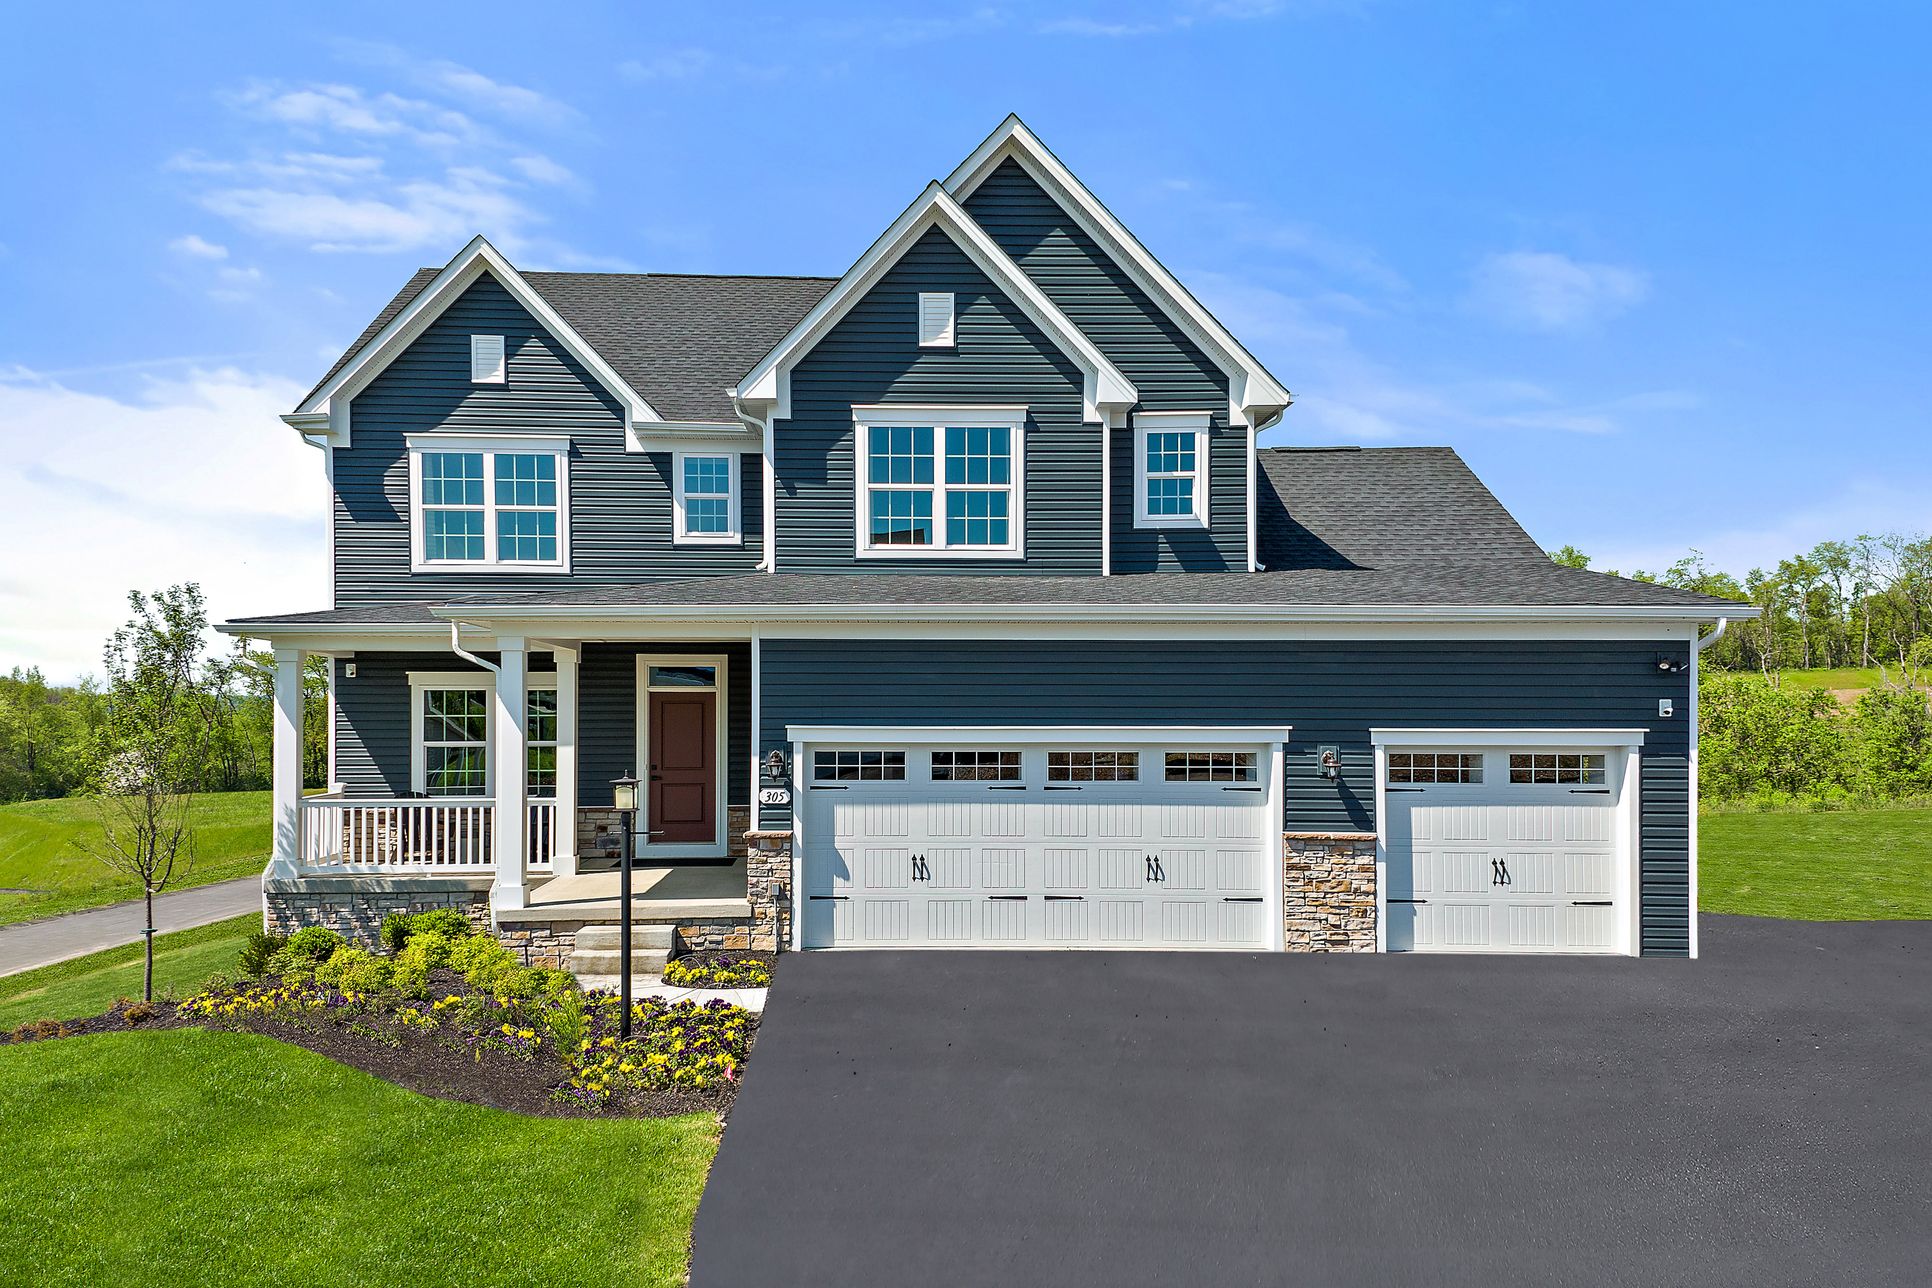 Visit our Decorated Bear Run Model Home